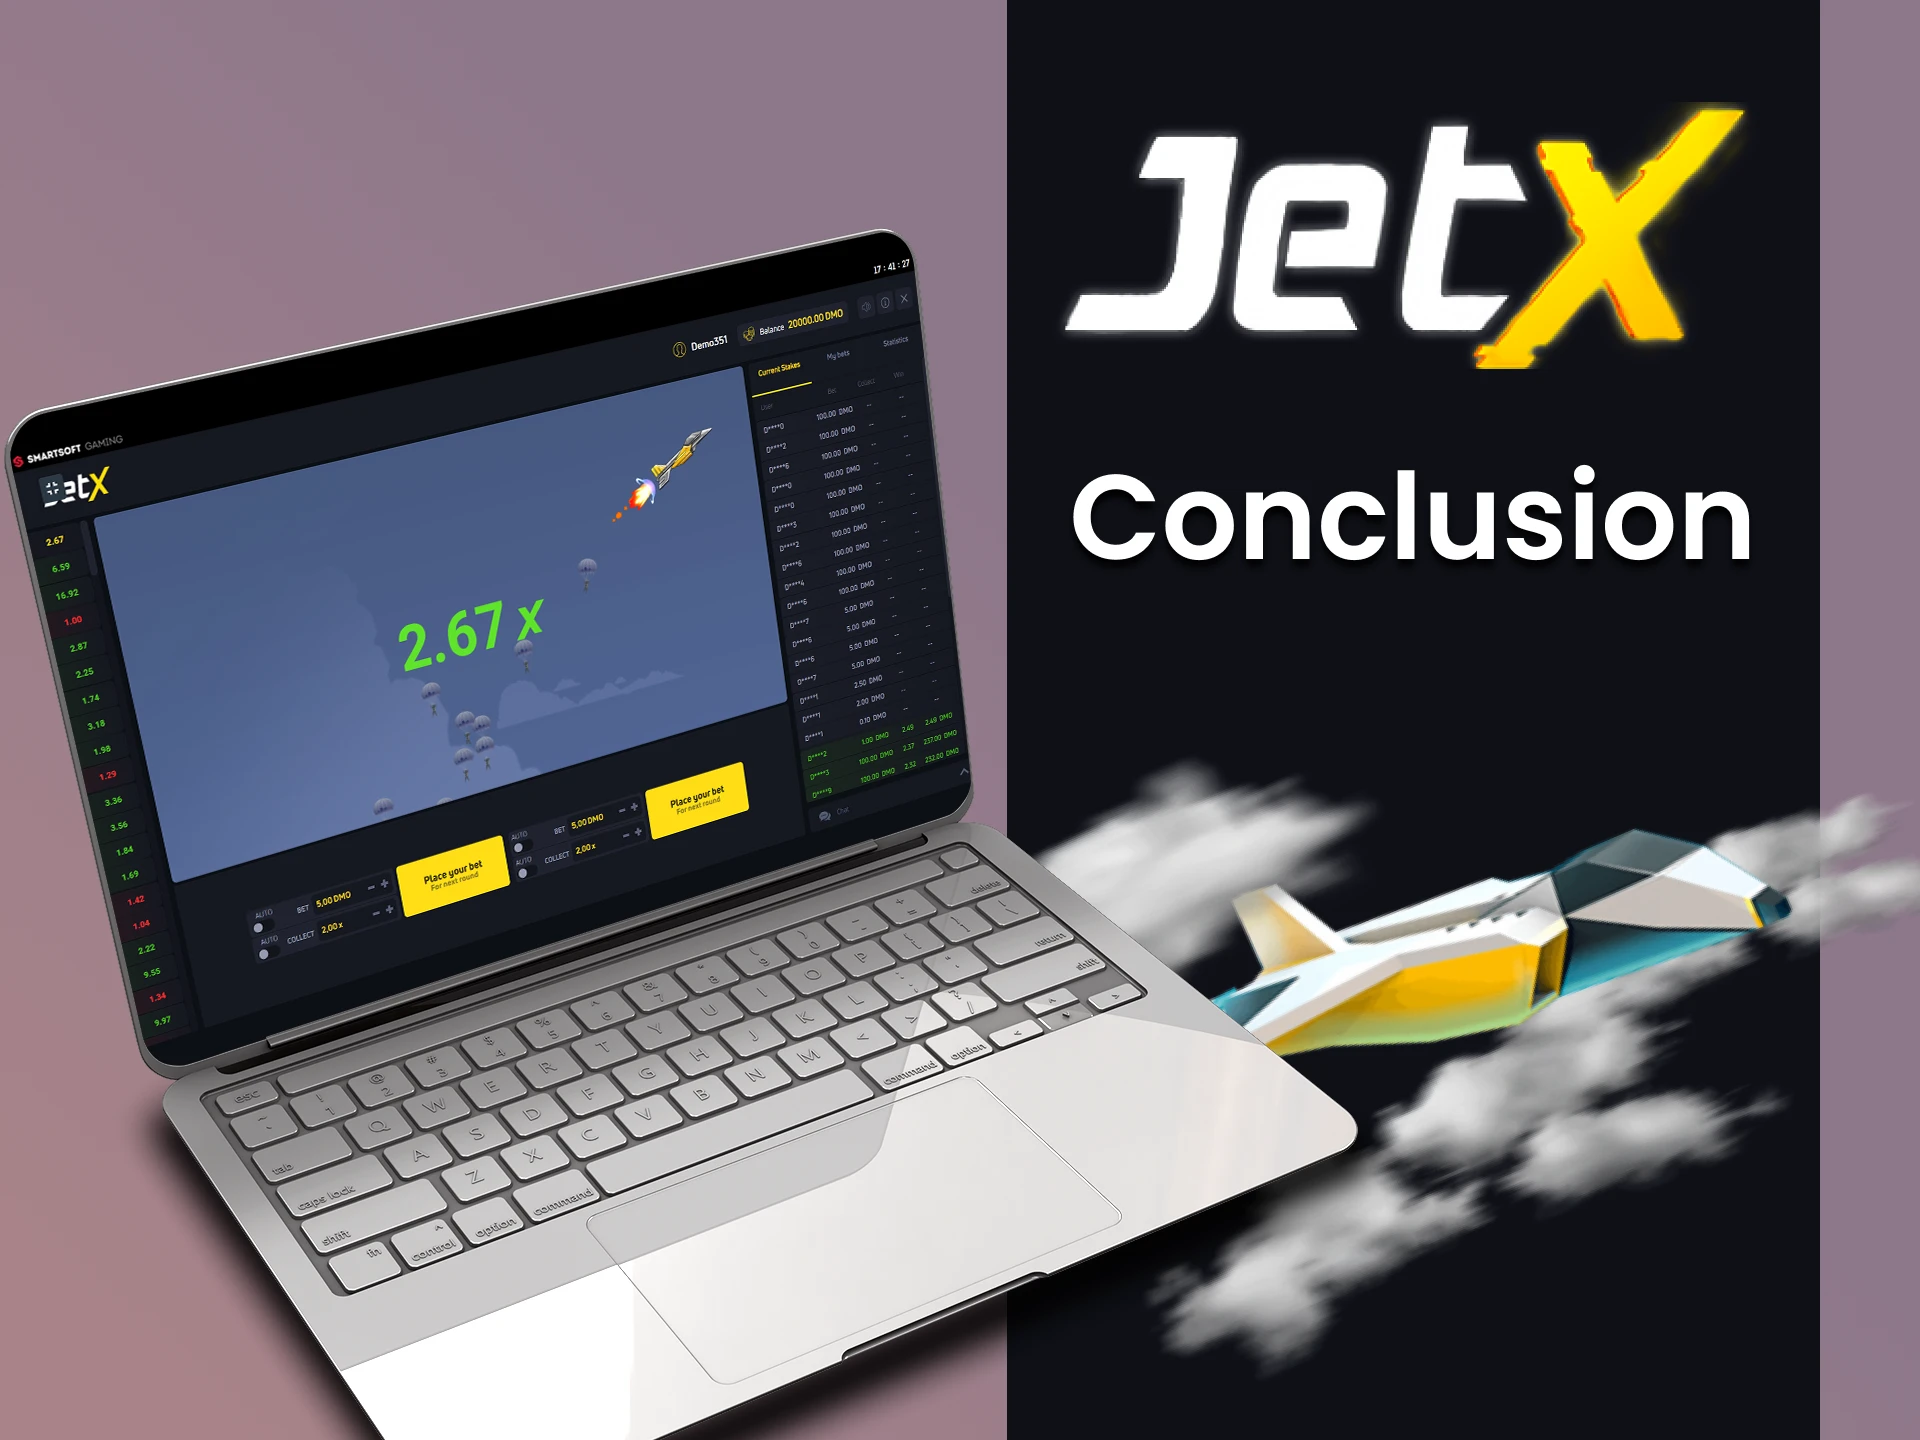 Having studied tactics and strategies, you will definitely win in JetX.